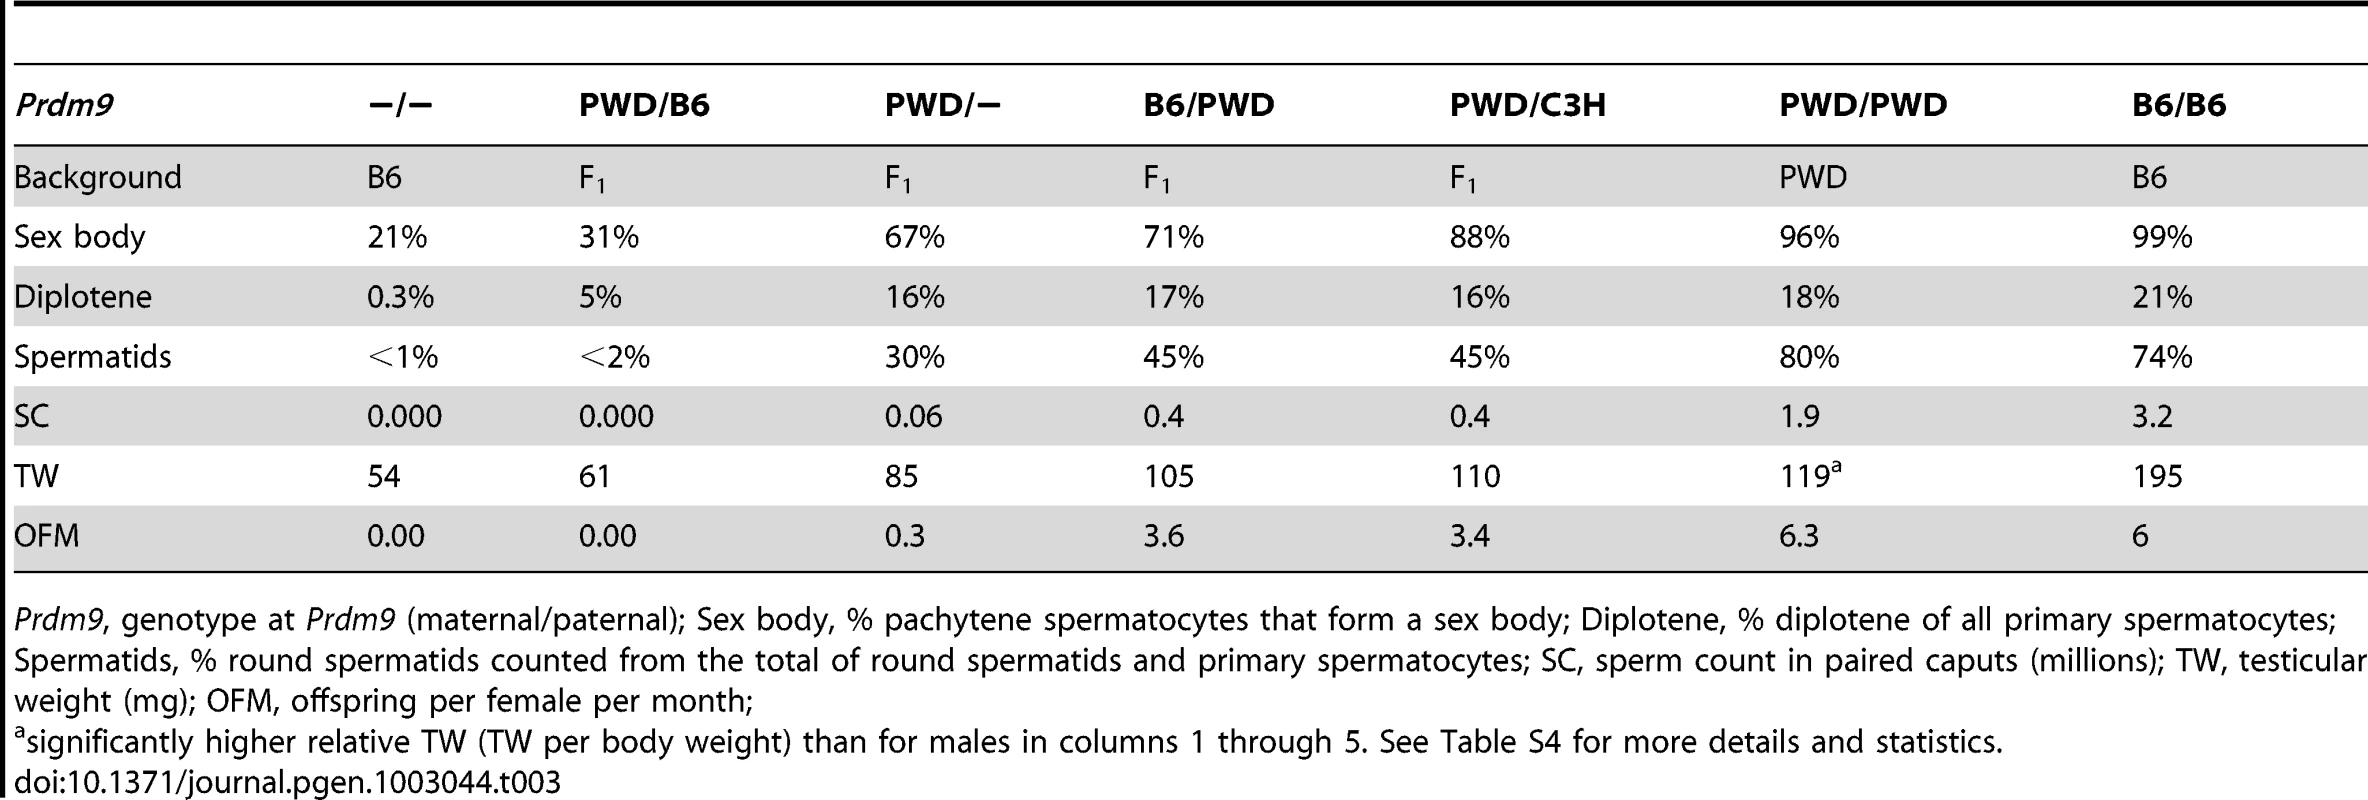 Overview of male reproductive phenotypes.